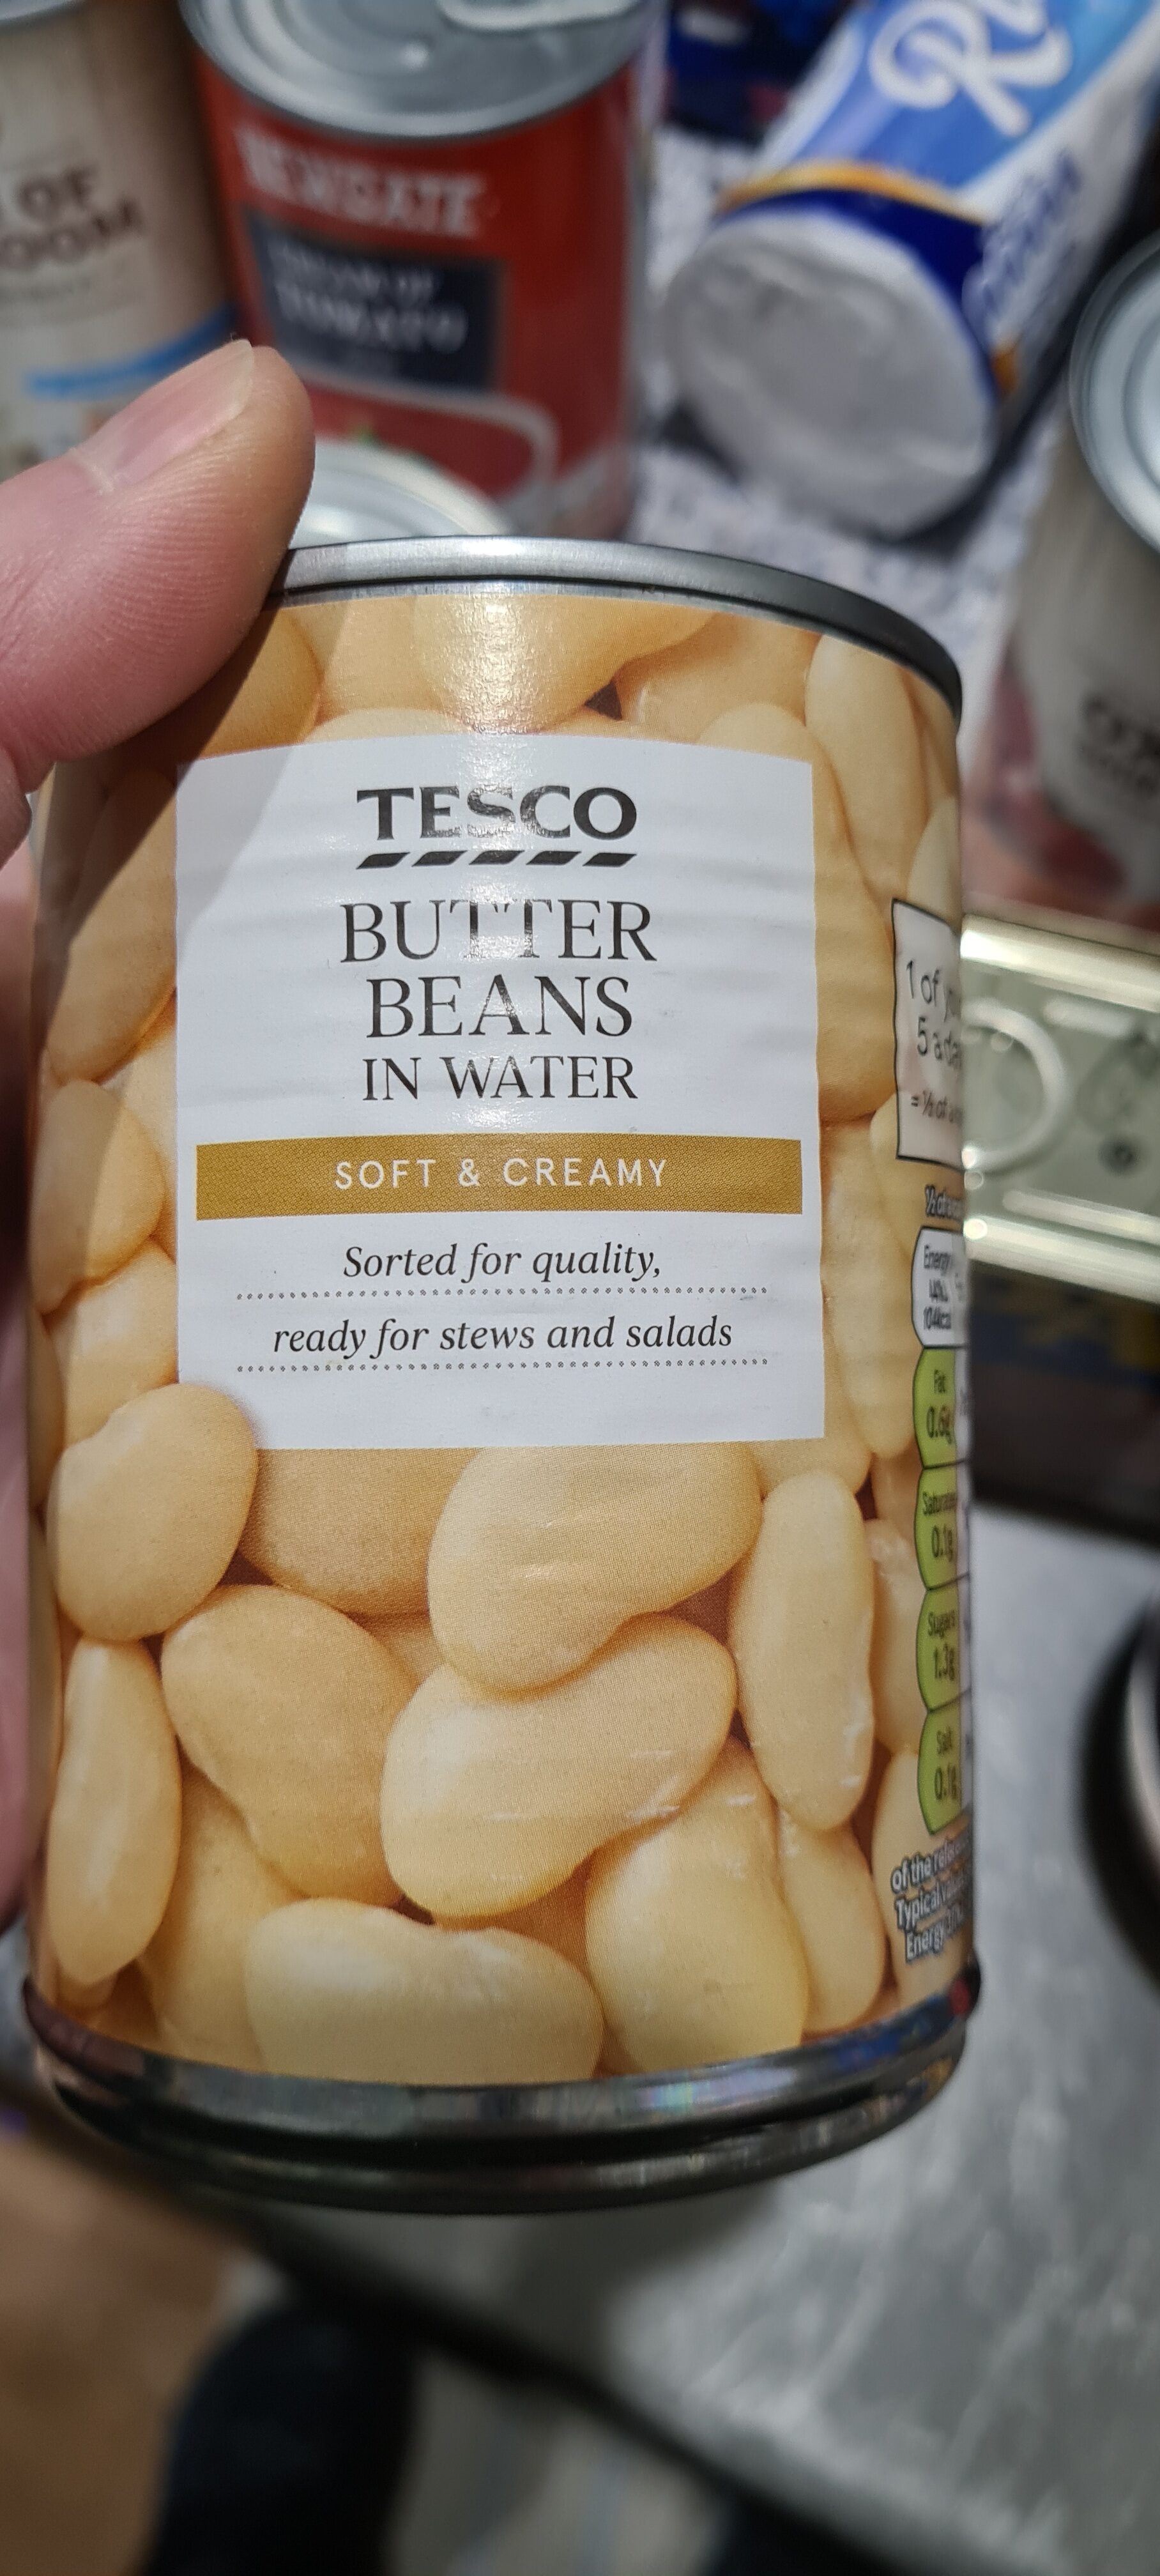 Butterbeans in water - Product